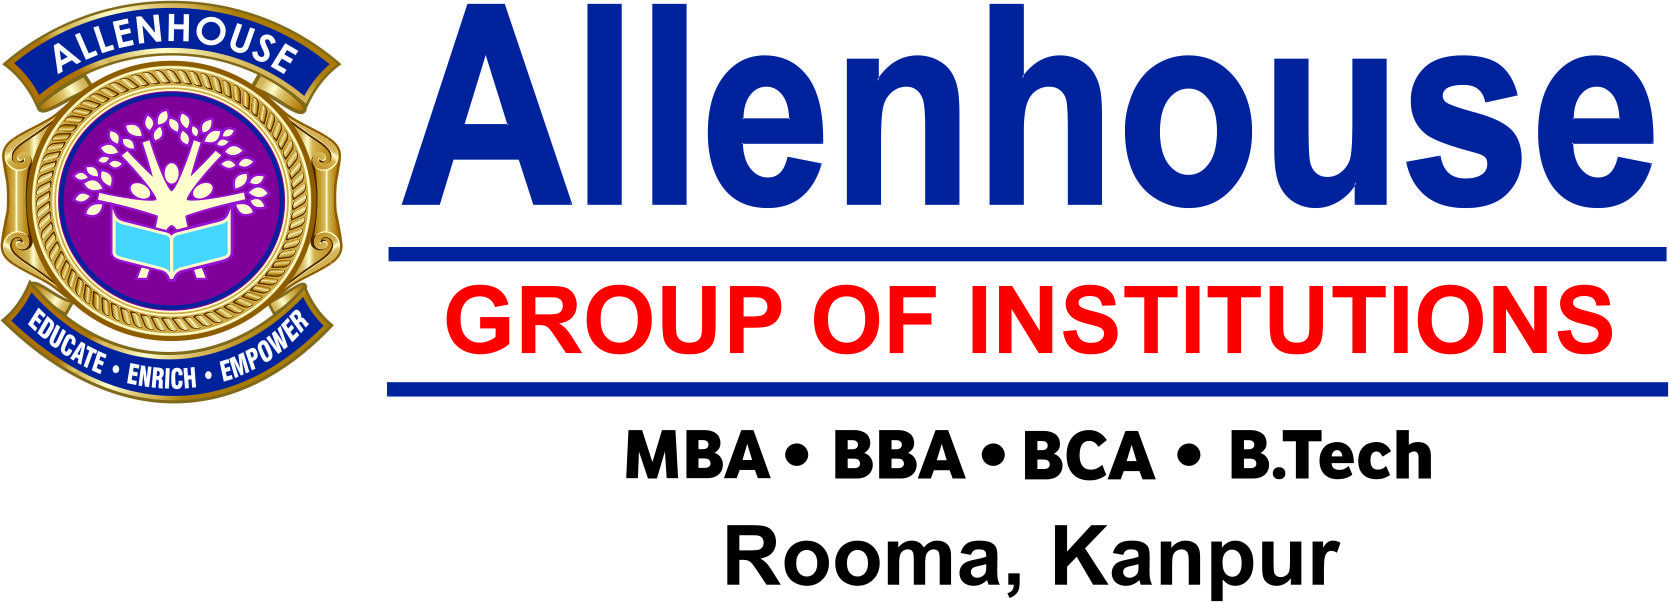 Allenhouse Group of Institutions